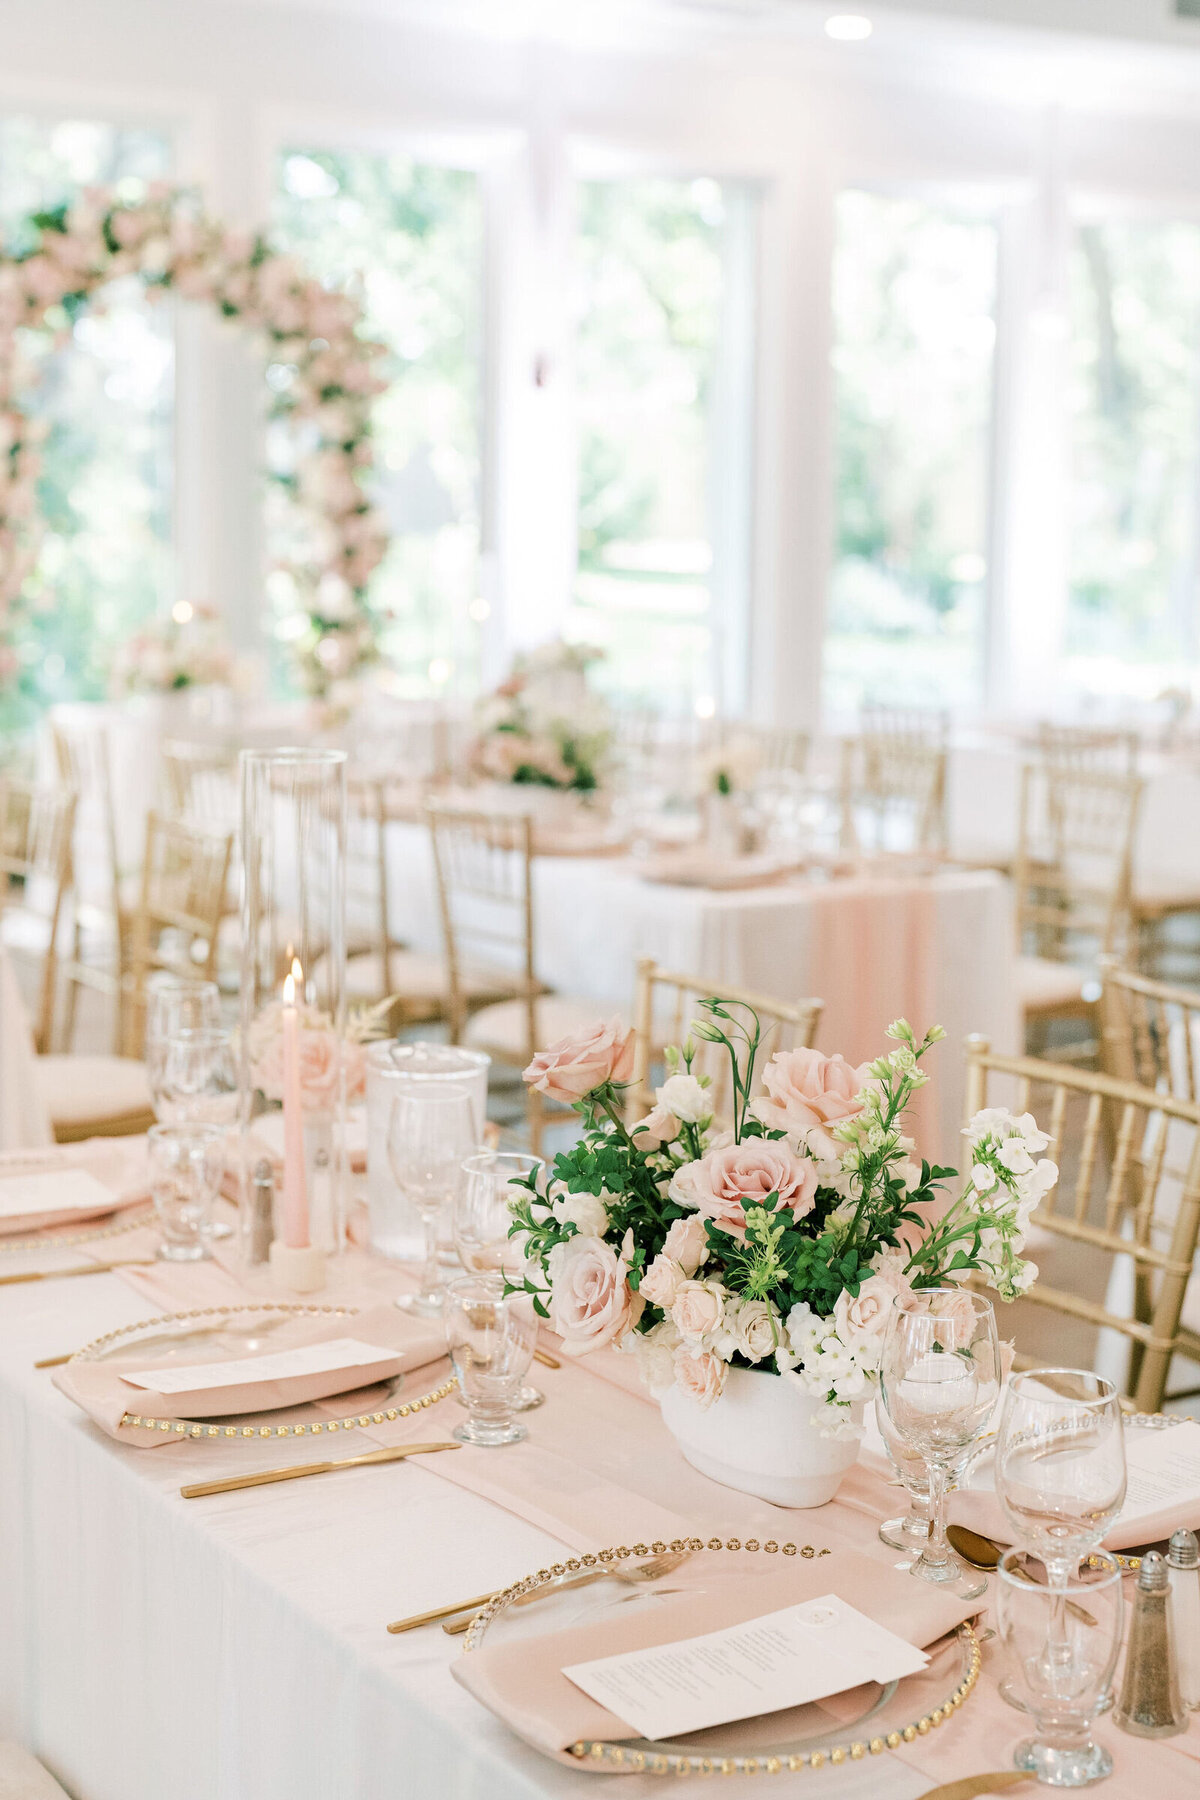 A wedding reception table setup with pink and white floral arrangements, candles, and elegant tableware is arranged in a bright room with gold chairs and a floral arch in the background, showcasing the exquisite touch of a full wedding planner.